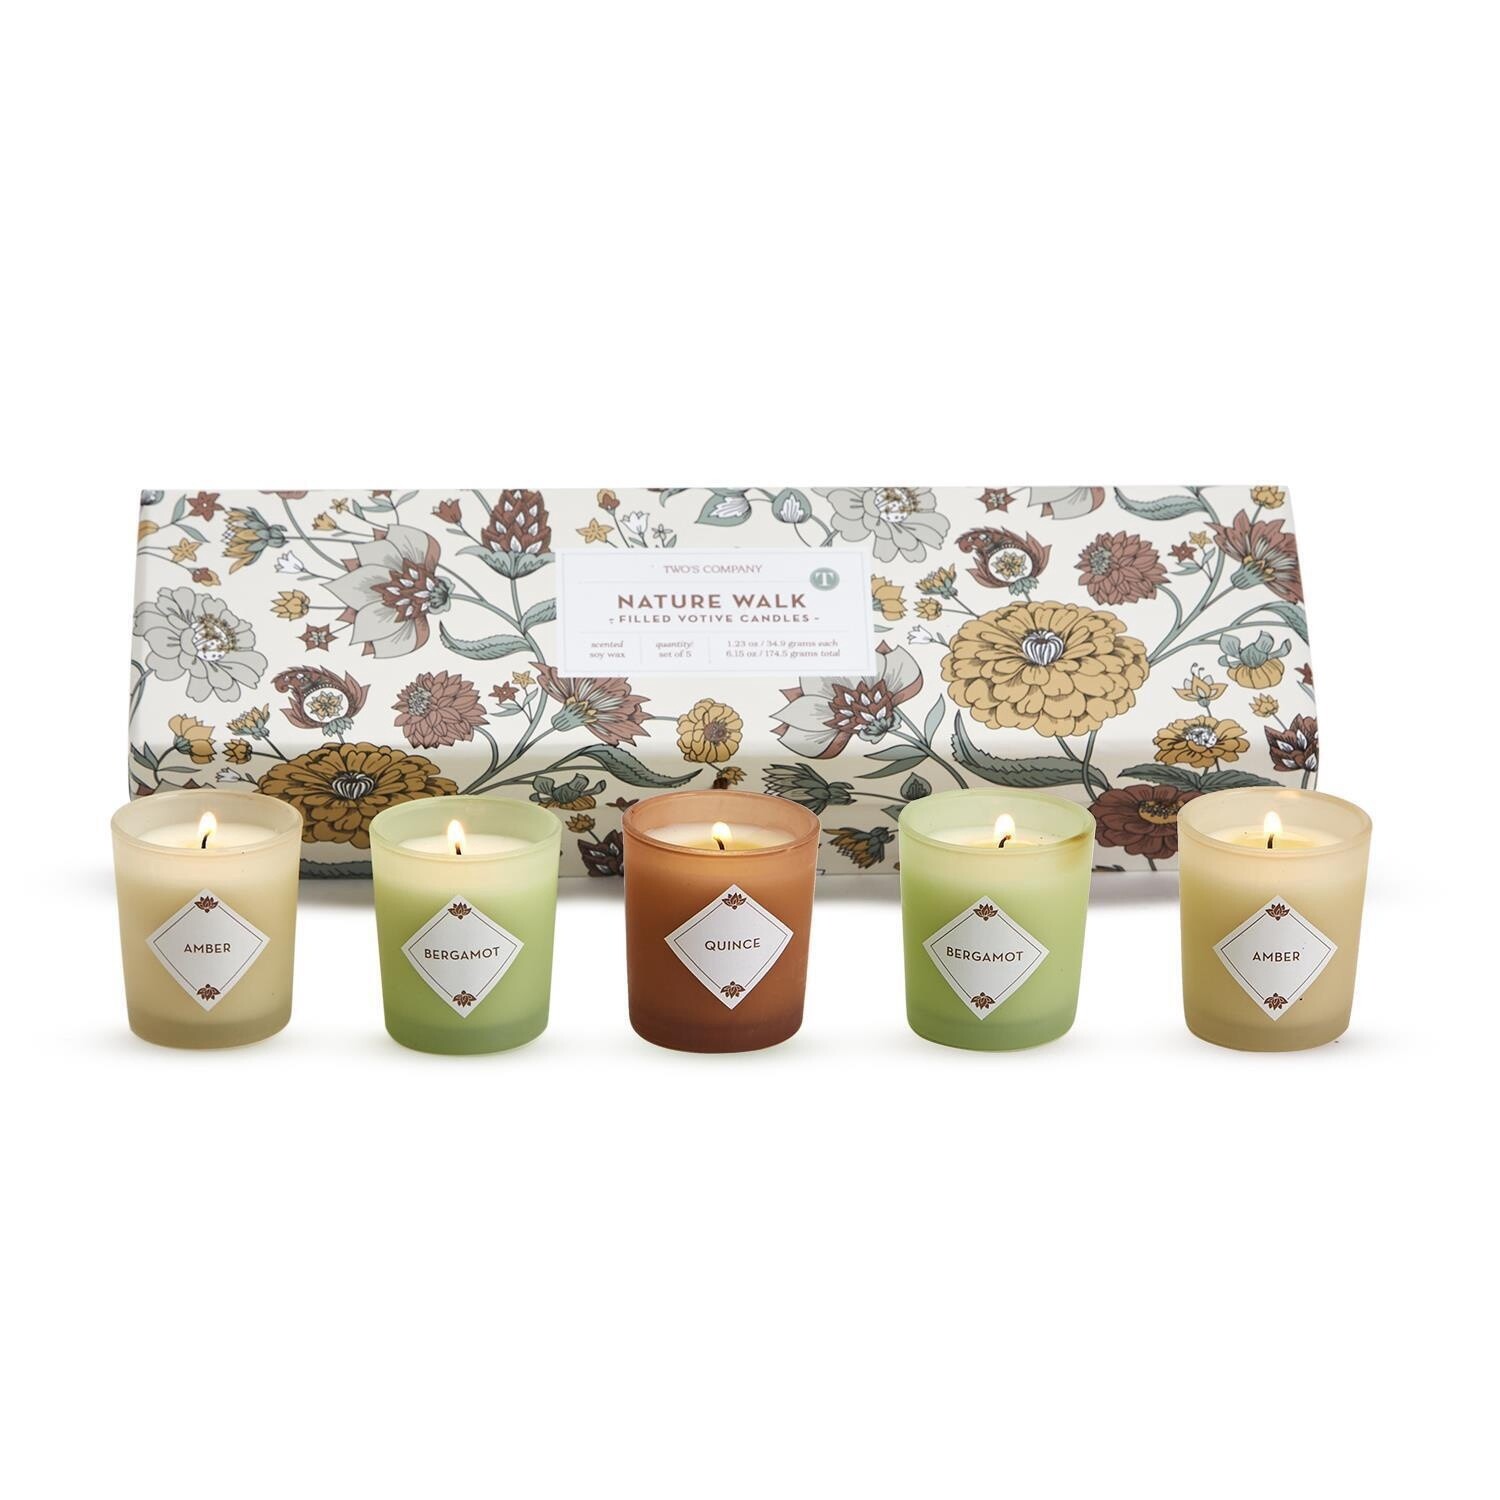 Set of 5 Scented Candles in Gift Box, Description: Nature Walk